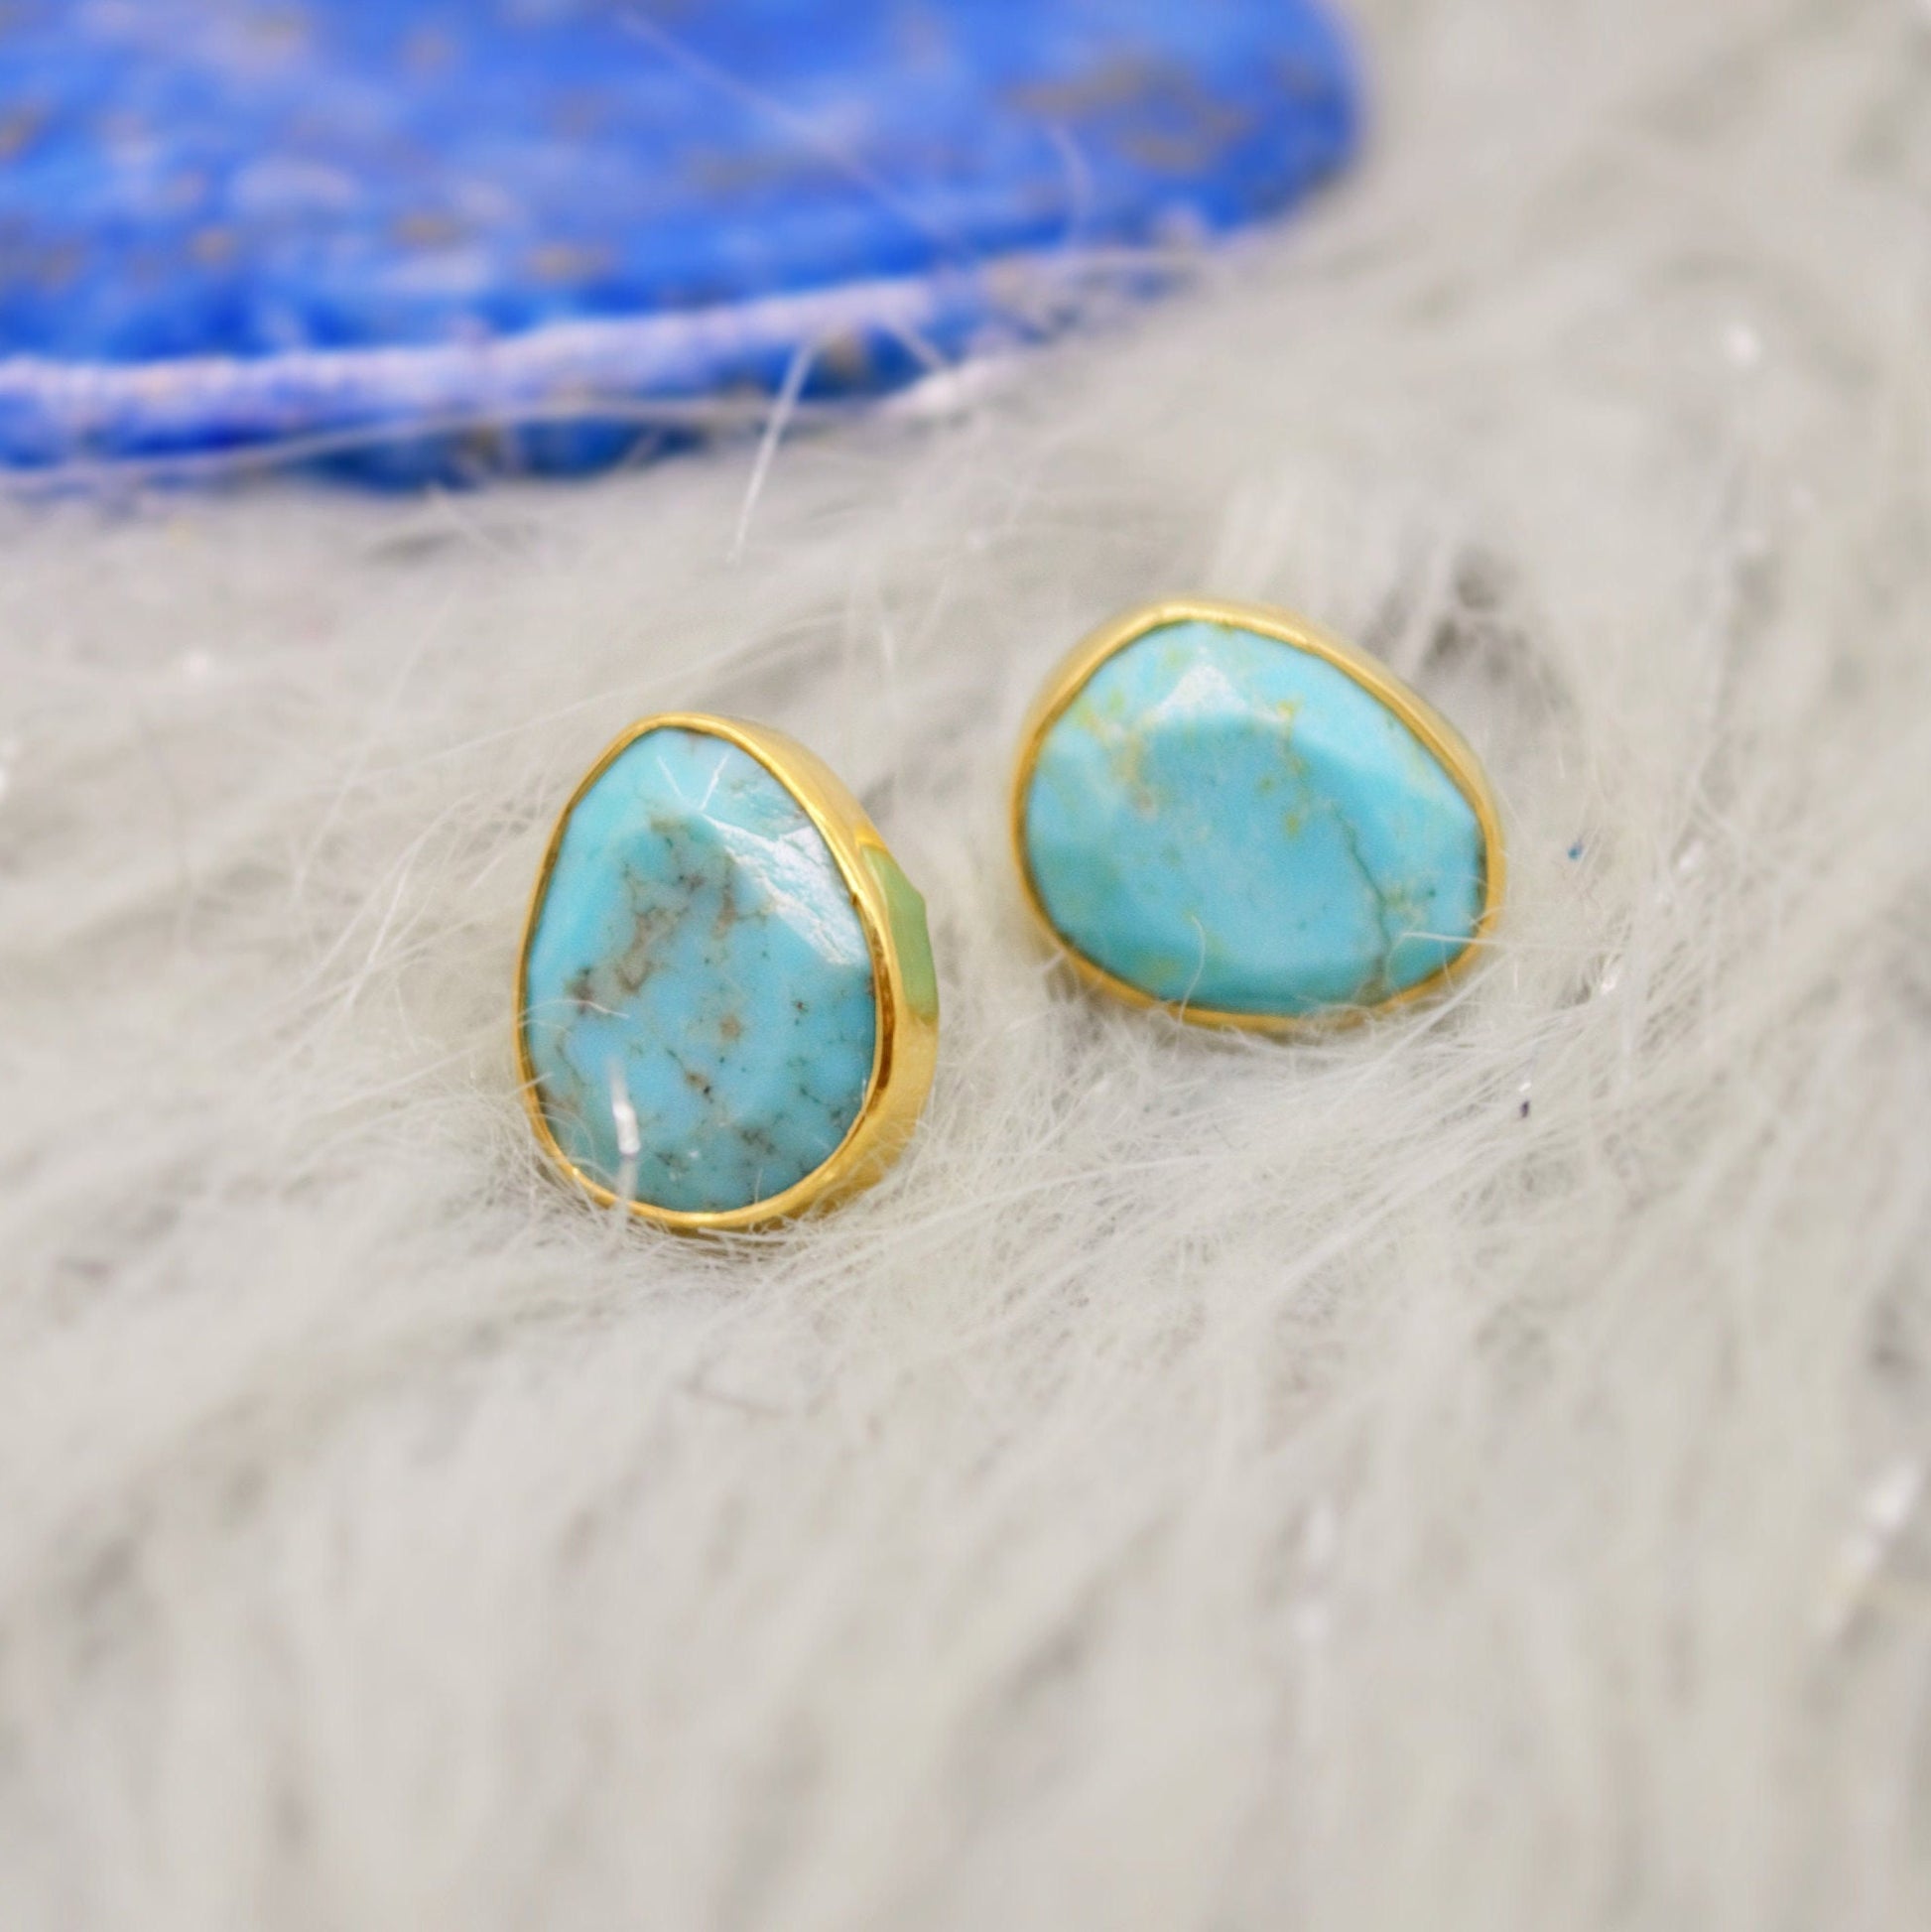 Blue Turquoise Gold Stud Earrings, Dainty Earrings, December Birthstone, Gold Plated Sterling Silver Stud, Birthday Gift For Her